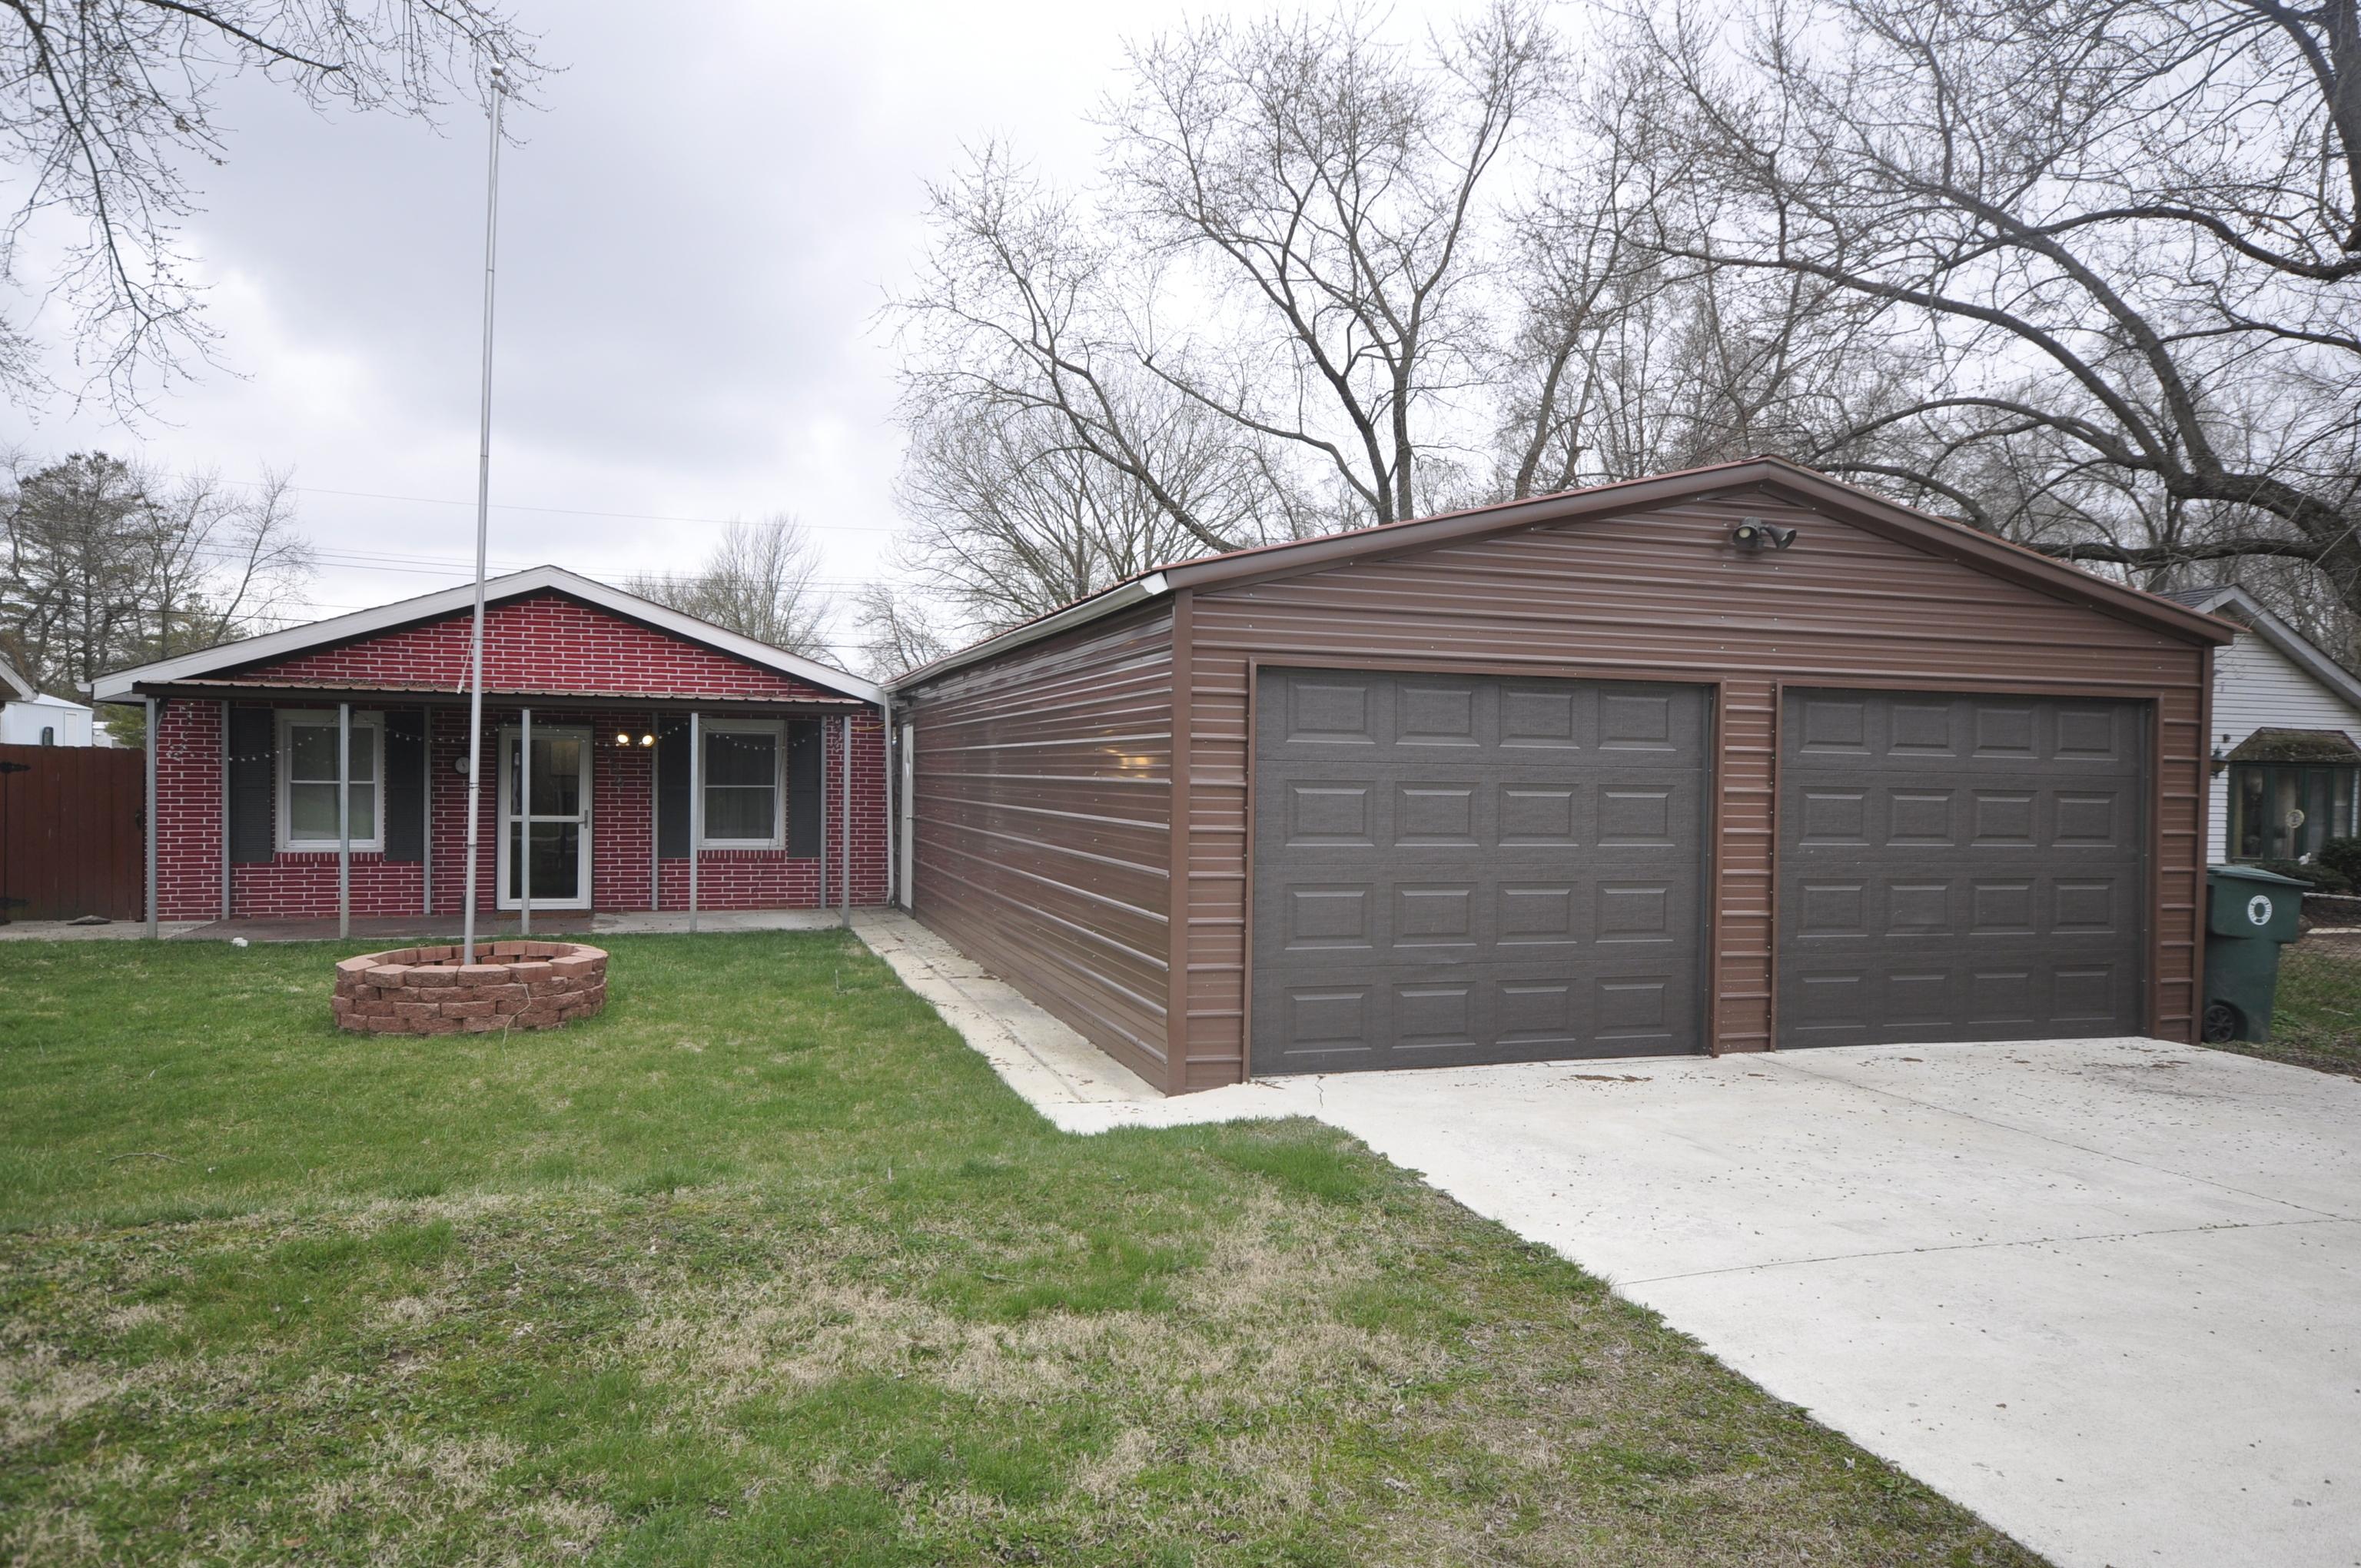 Photo one of 909 S Tennessee Ave Muncie IN 47302 | MLS 21969597